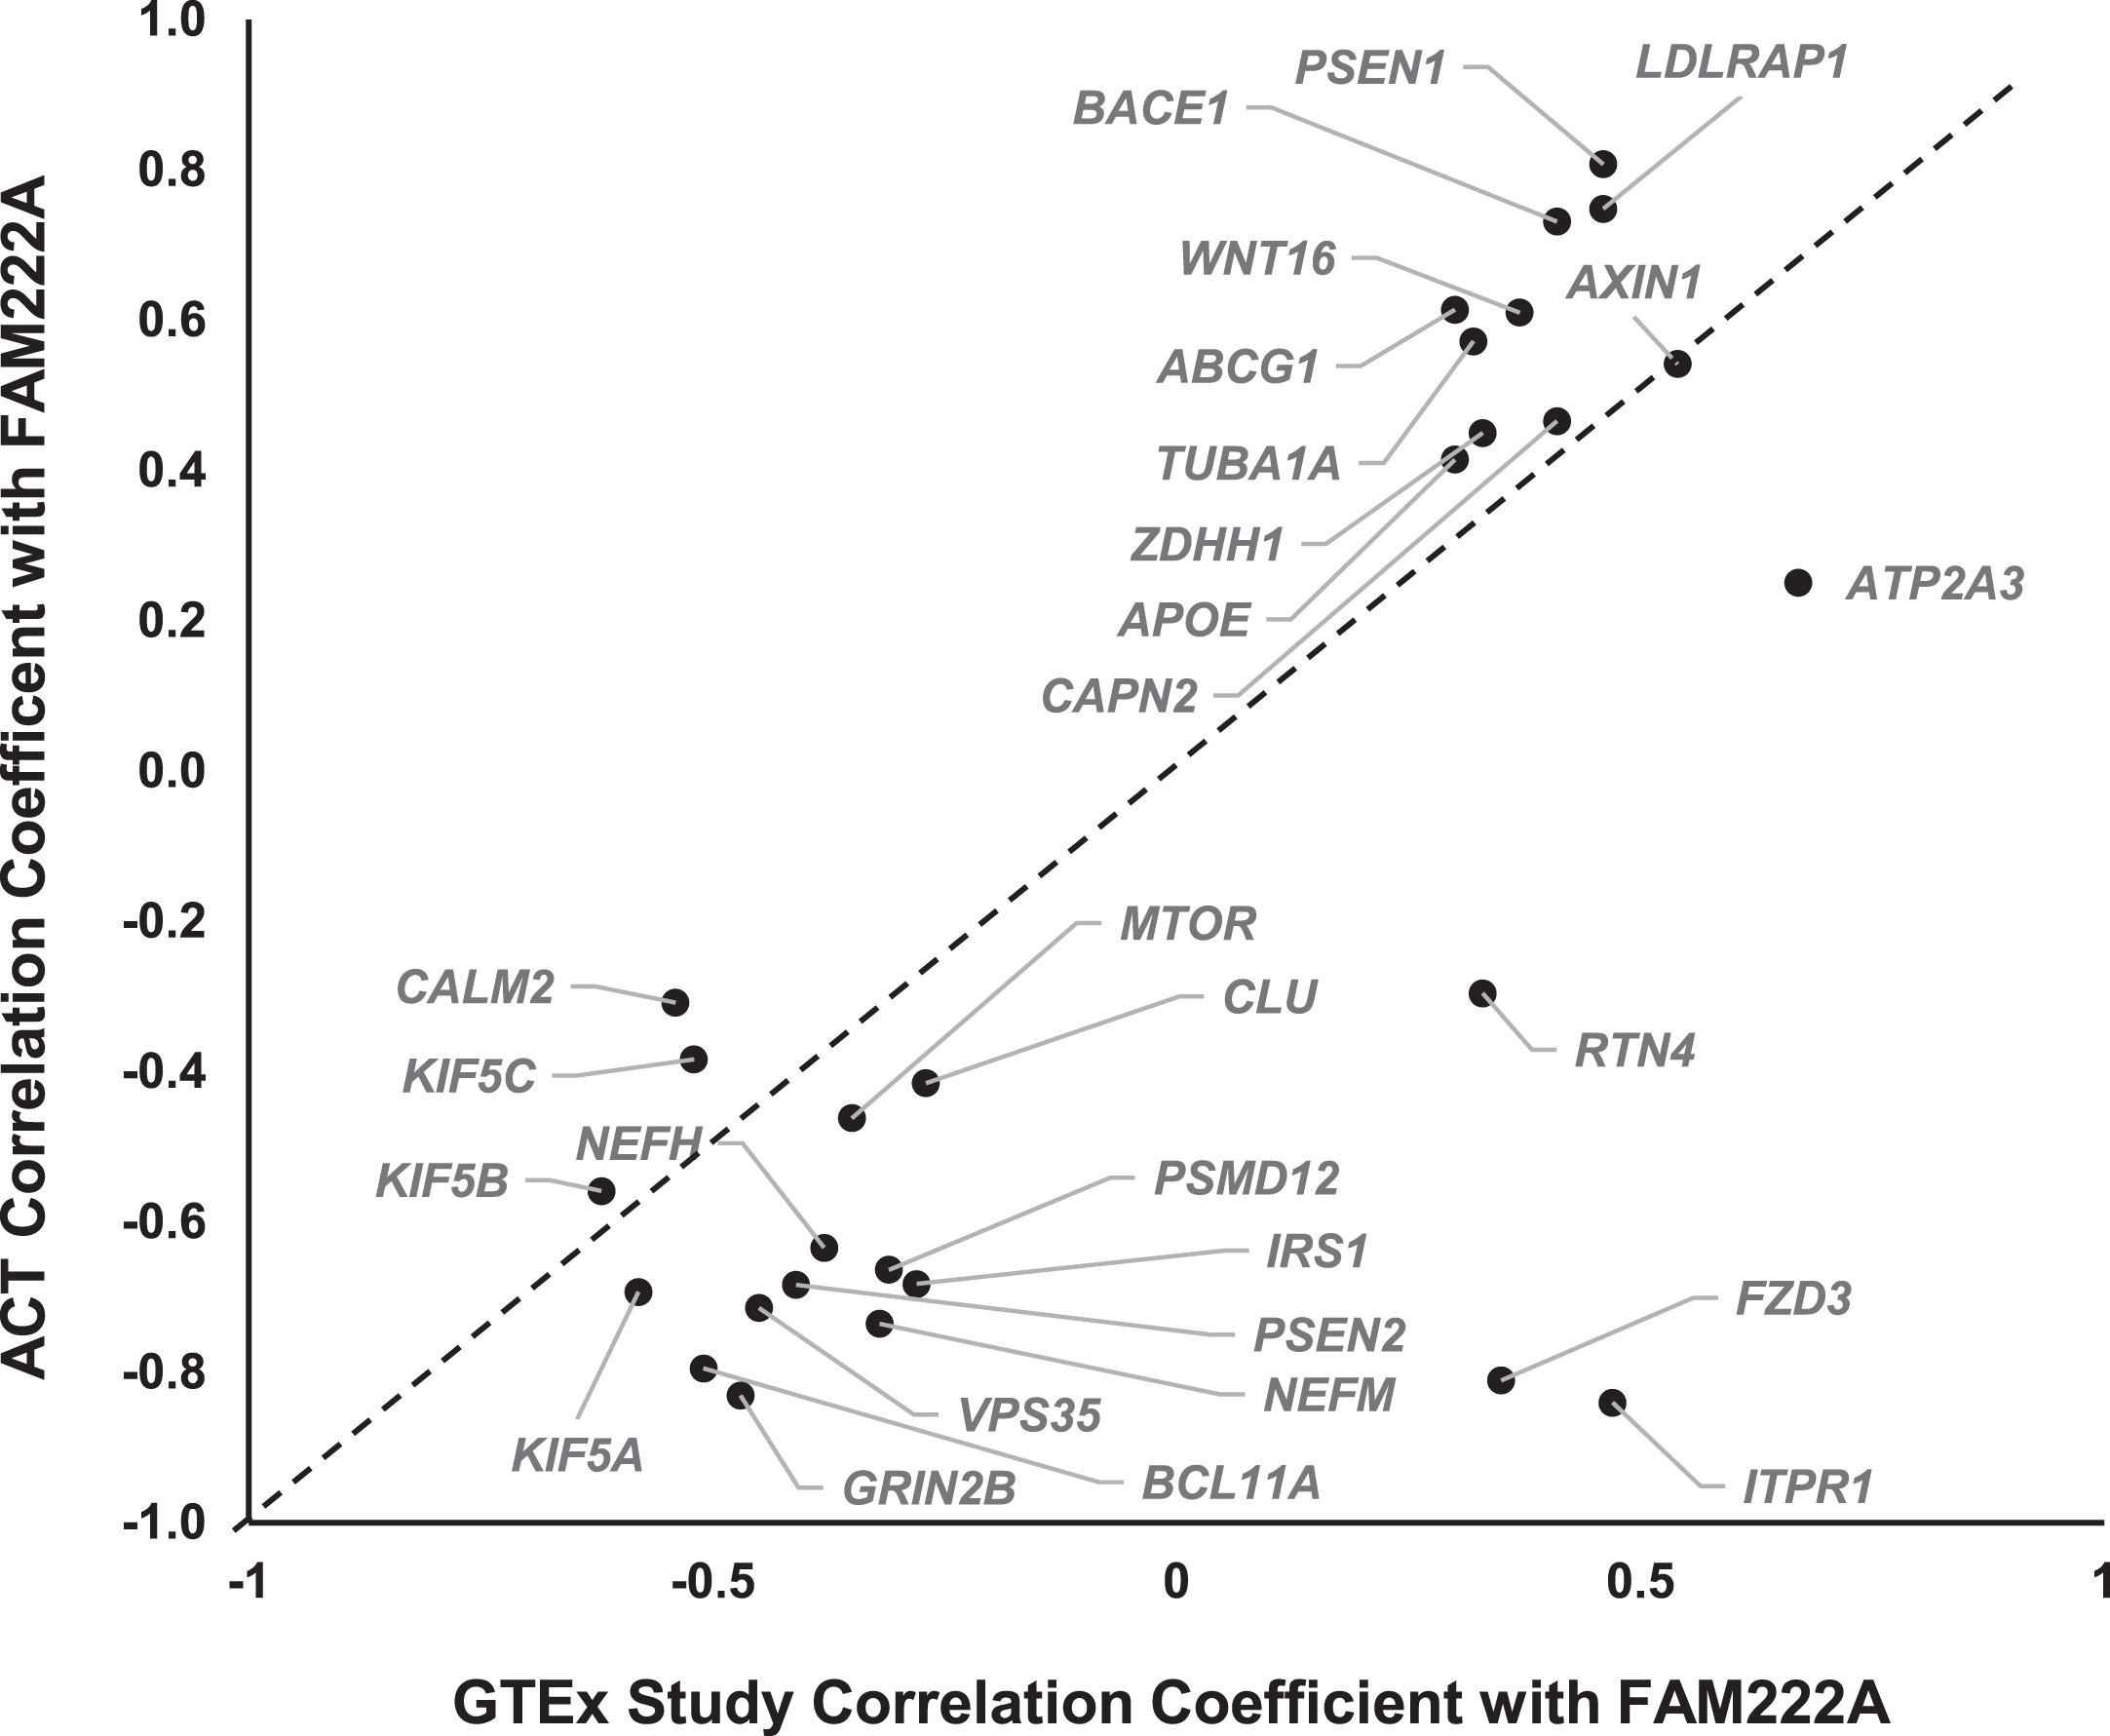 Scatterplot of Pearson correlation coefficients between AD-pathway related genes expression levels with FAM222A obtained from GTEx data and ACT data.